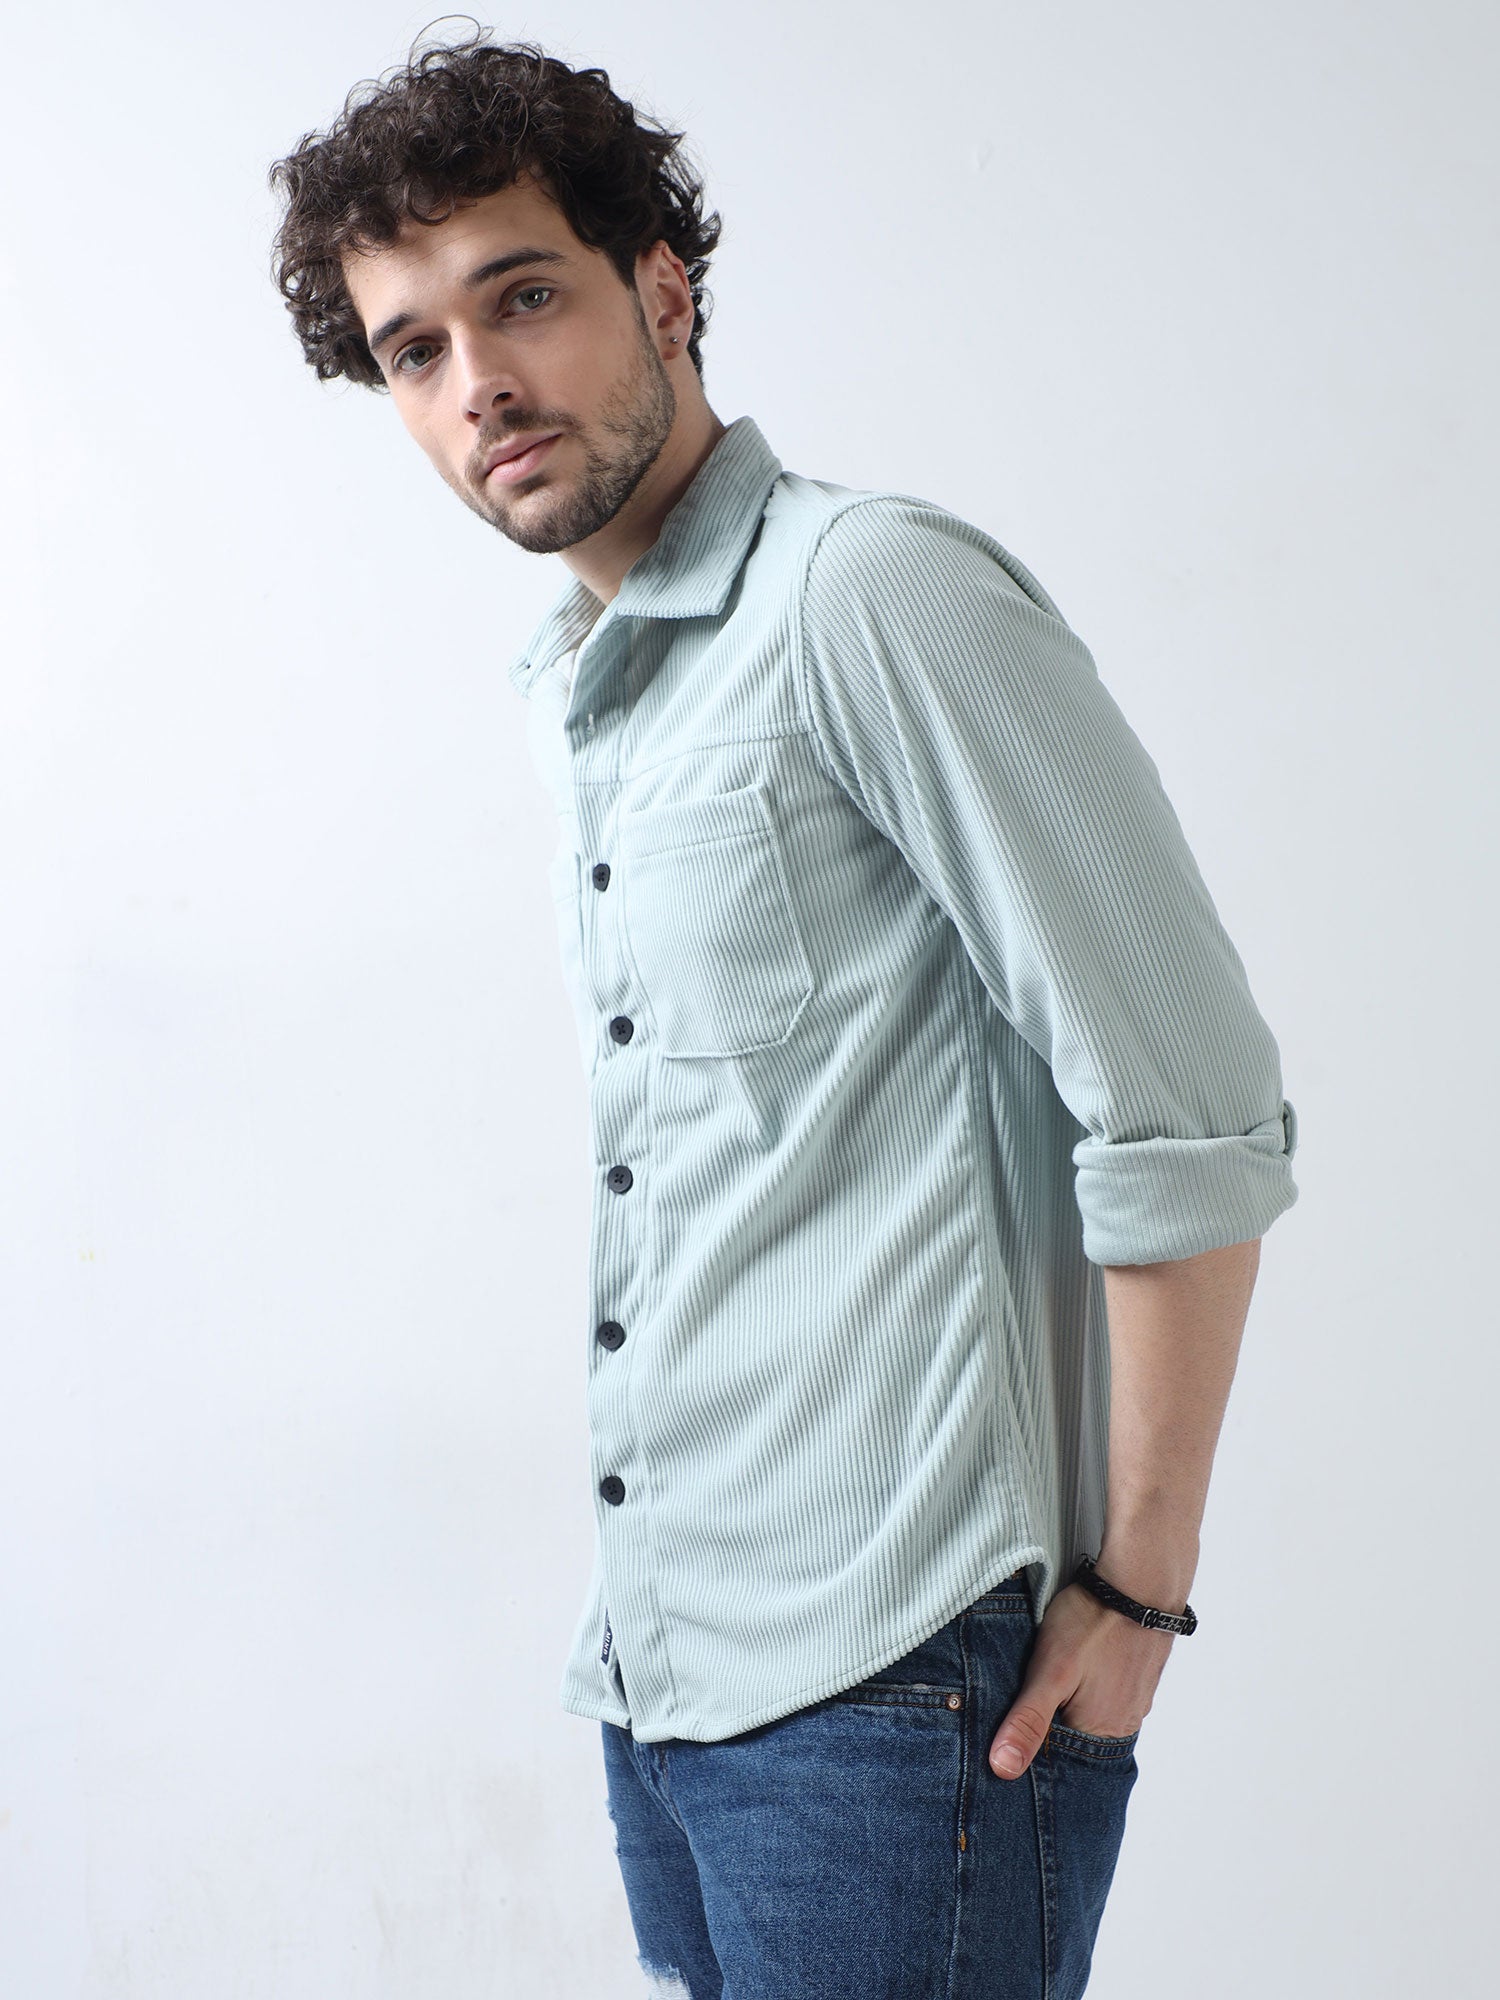 Buy cool green double pocket shirt at great priceRs. 1499.00